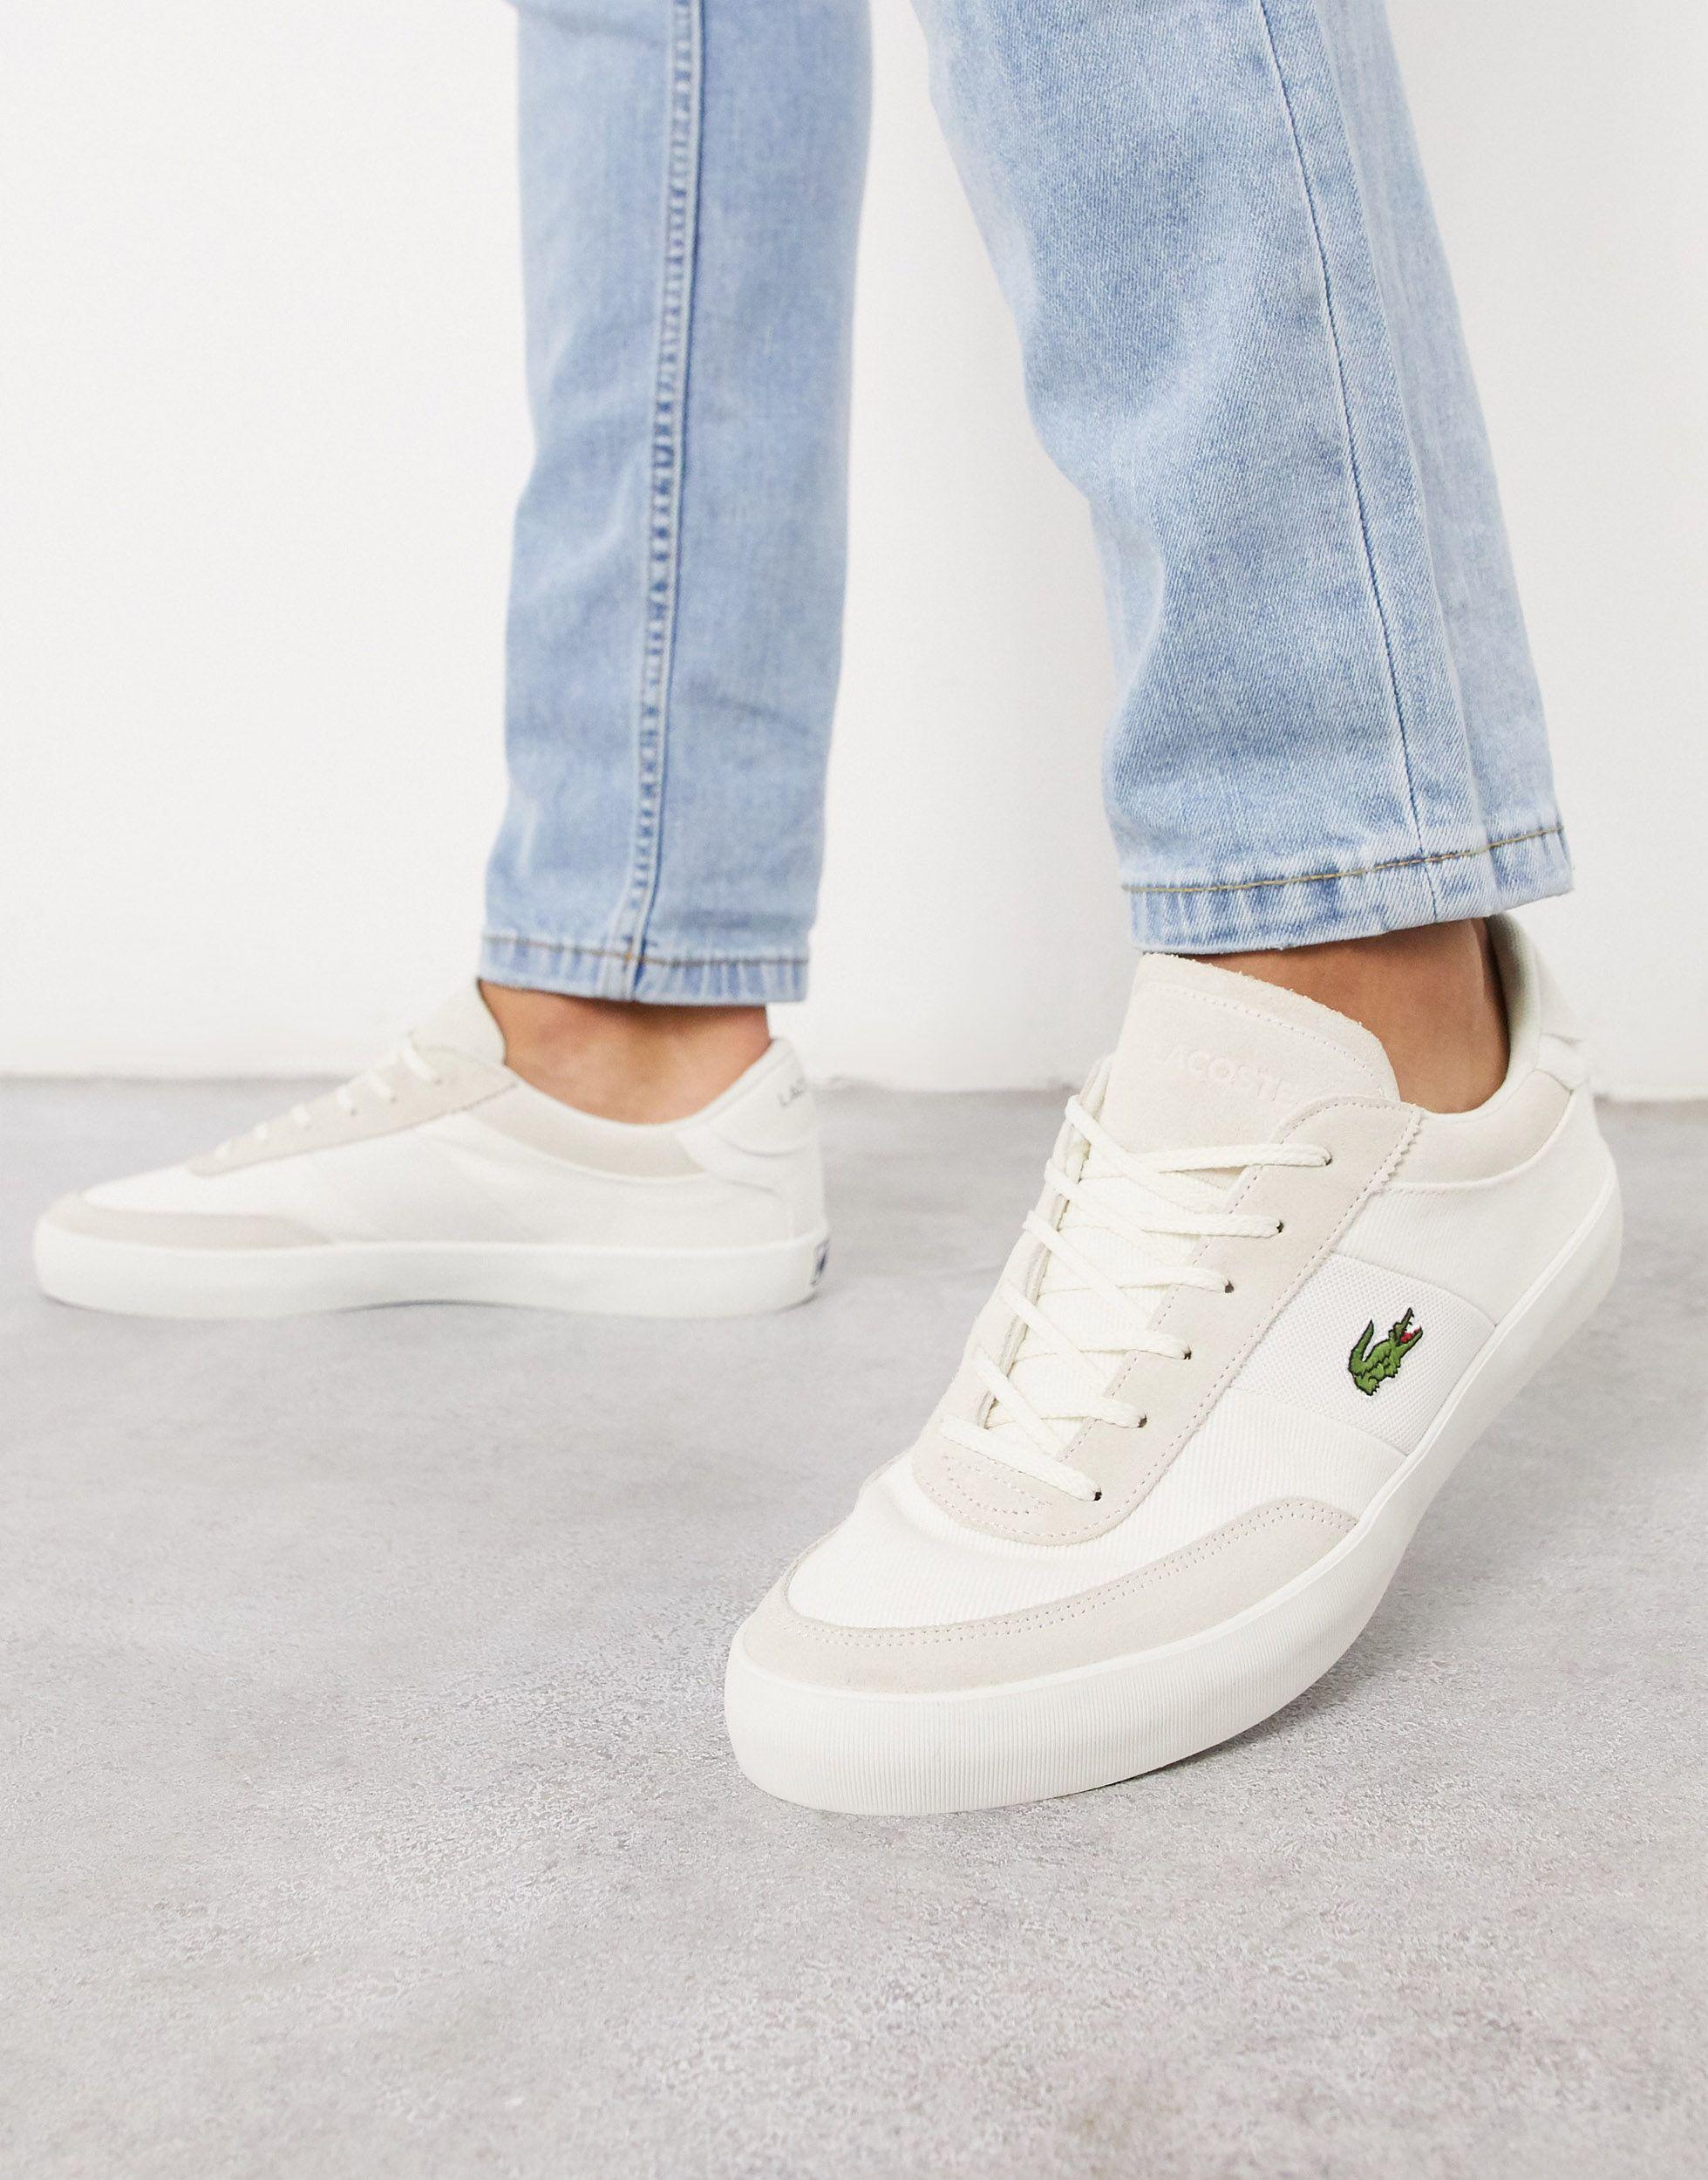 Details about  / LACOSTE Mens Court Master Court Sneakers White